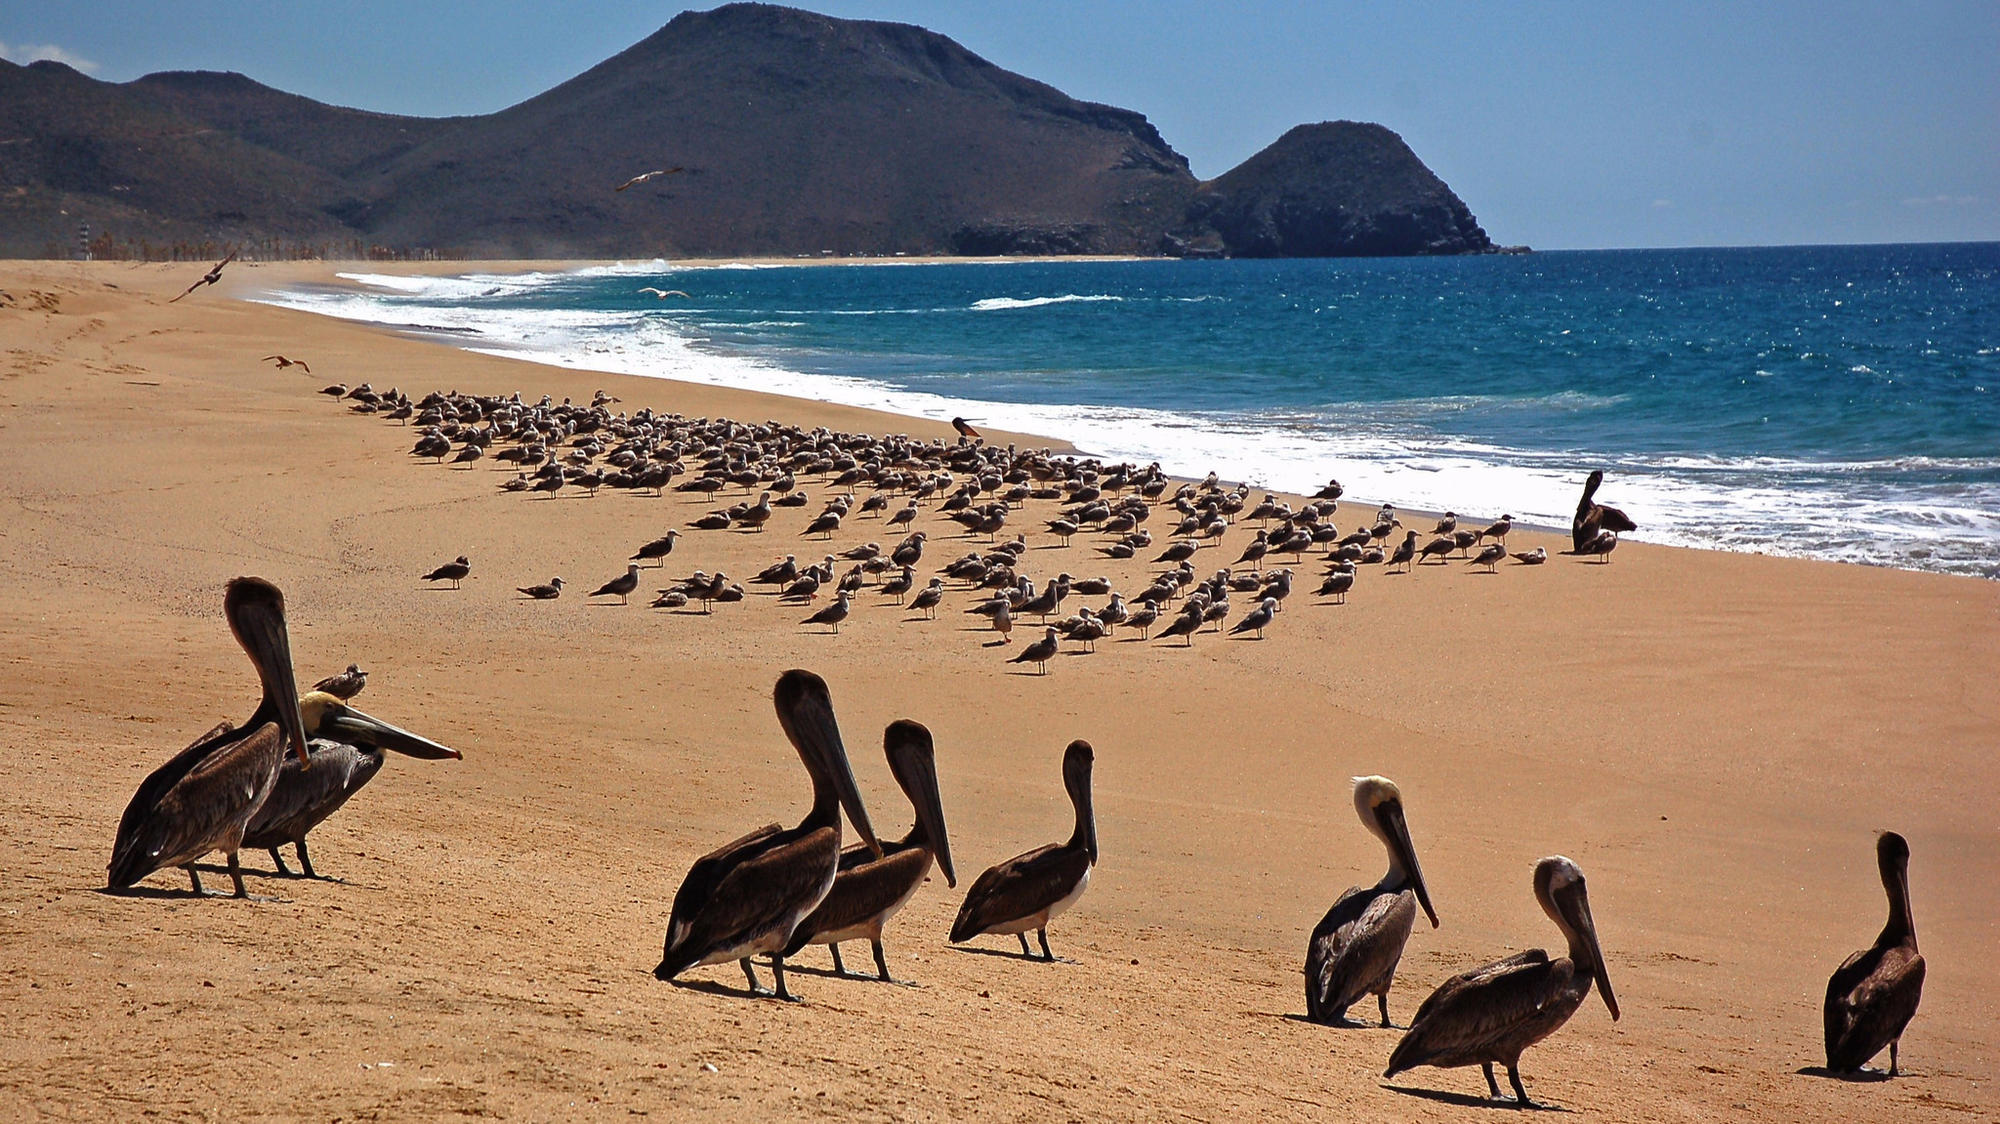 Todos Santos, about an hour north of Cabo San Lucas in Baja California, features miles of mostly empty beach with rough surf and plenty of seabirds.